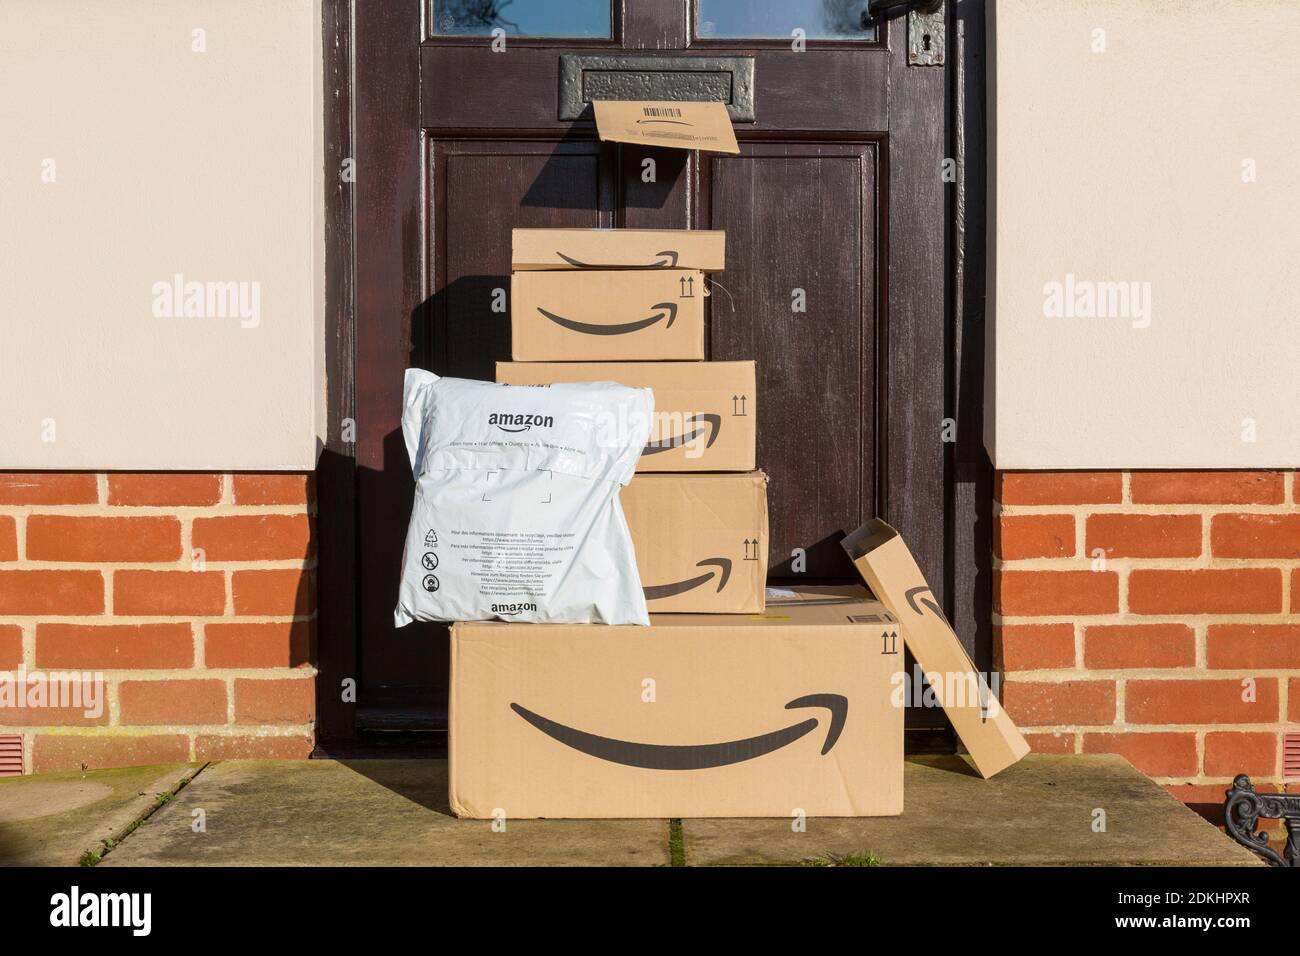 Internet shopping so an Amazon delivery of parcels, and boxes outside a front door. Stock Photo